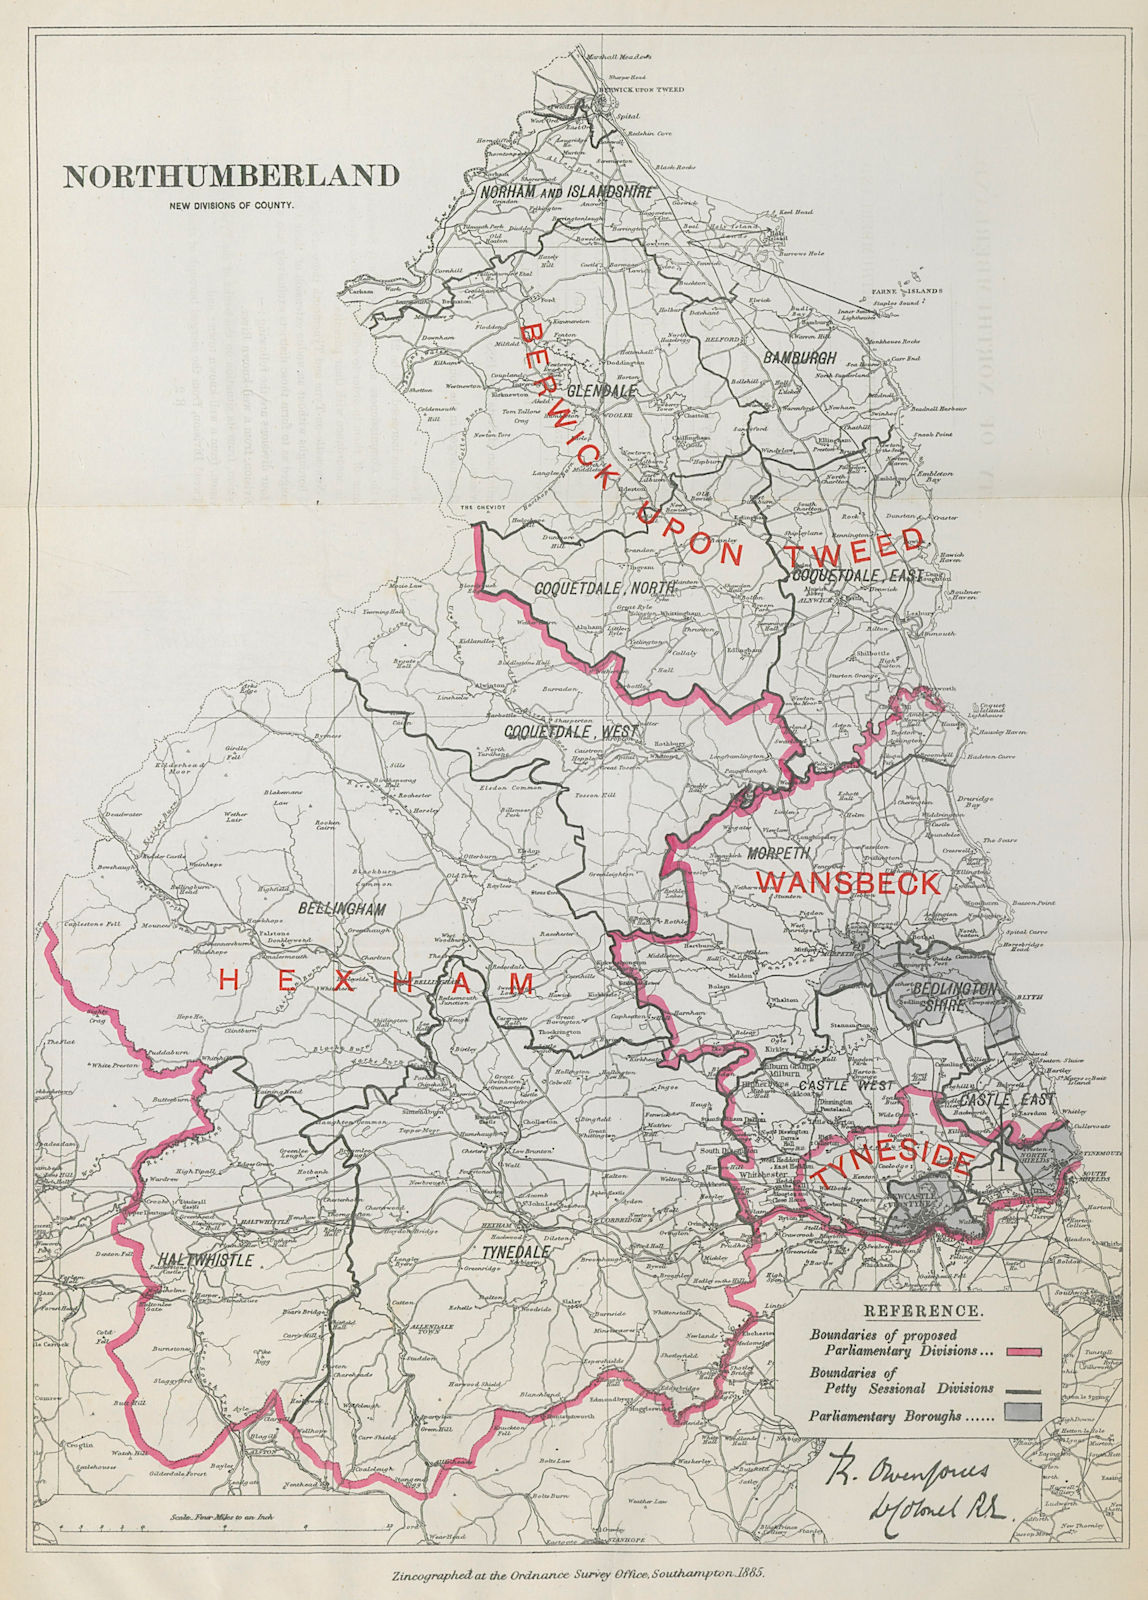 Northumberland Parliamentary Divisions. Tyneside. BOUNDARY COMMISSION 1885 map